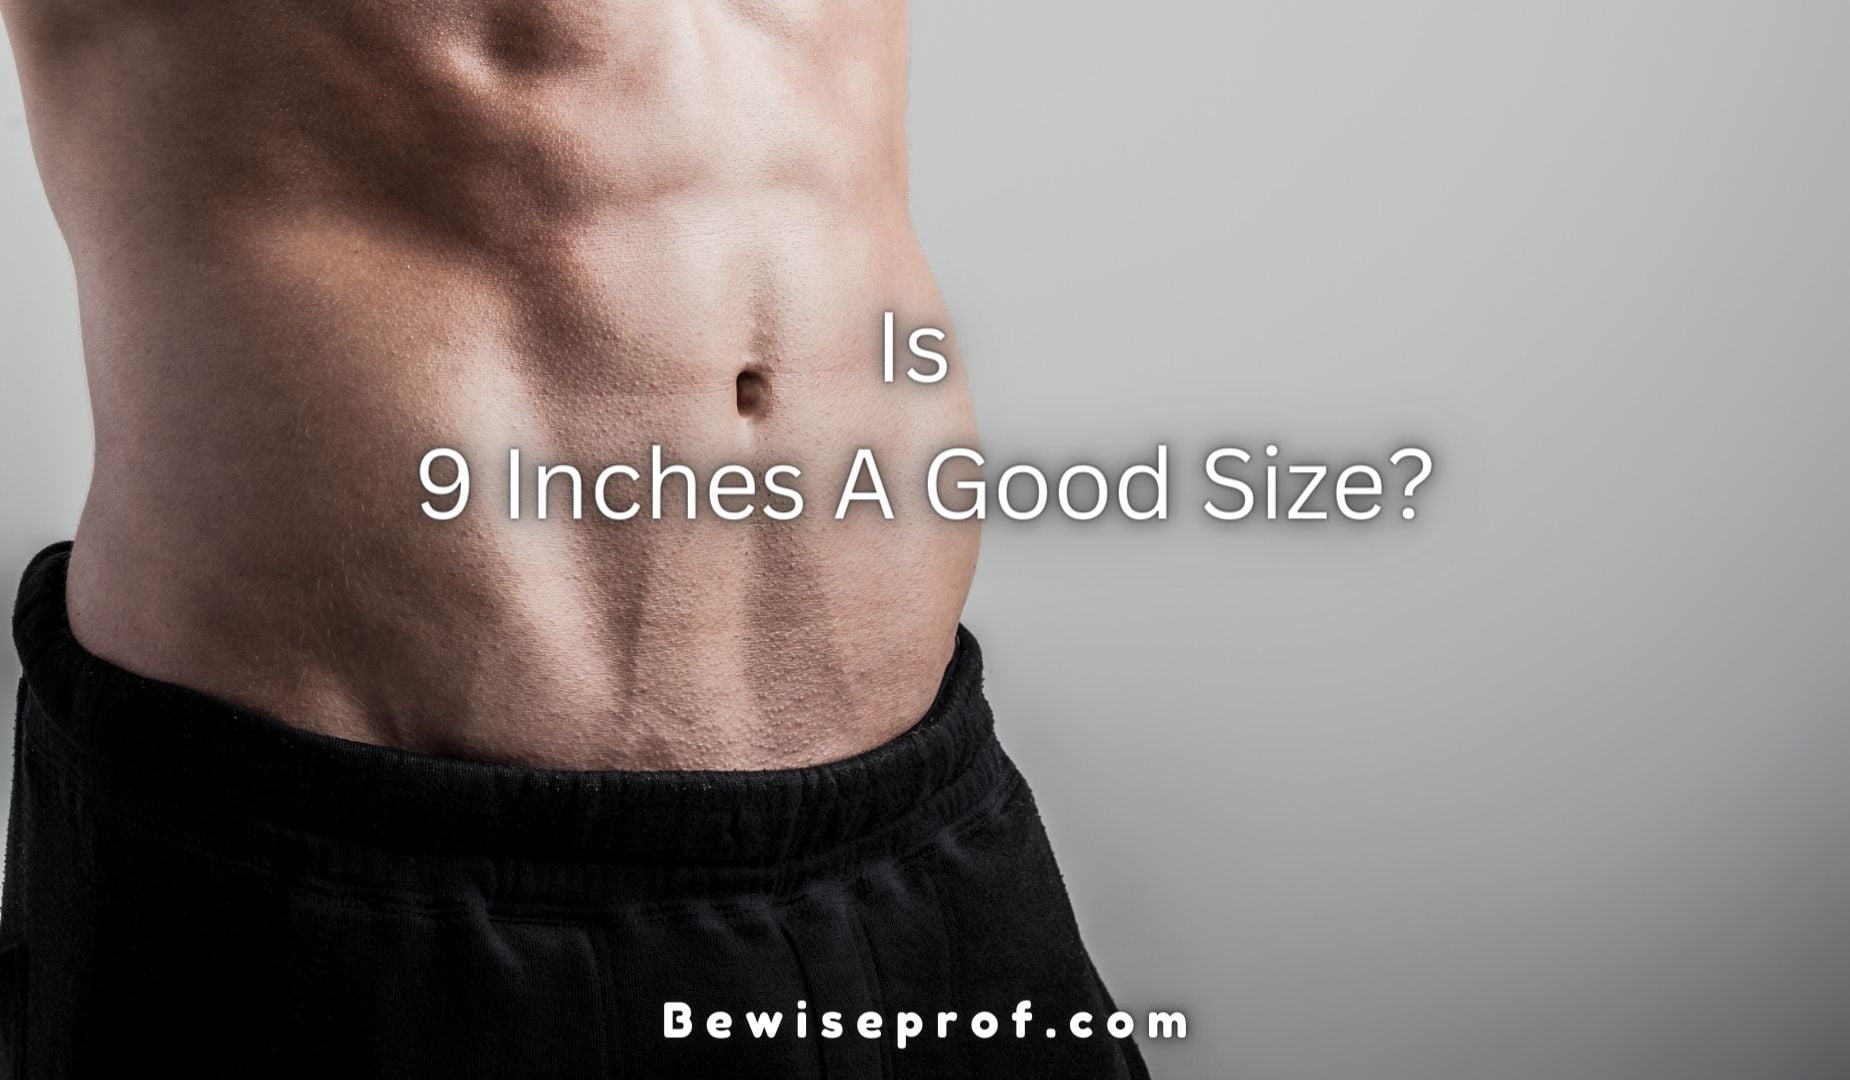 Is 9 Inches a Good Size?